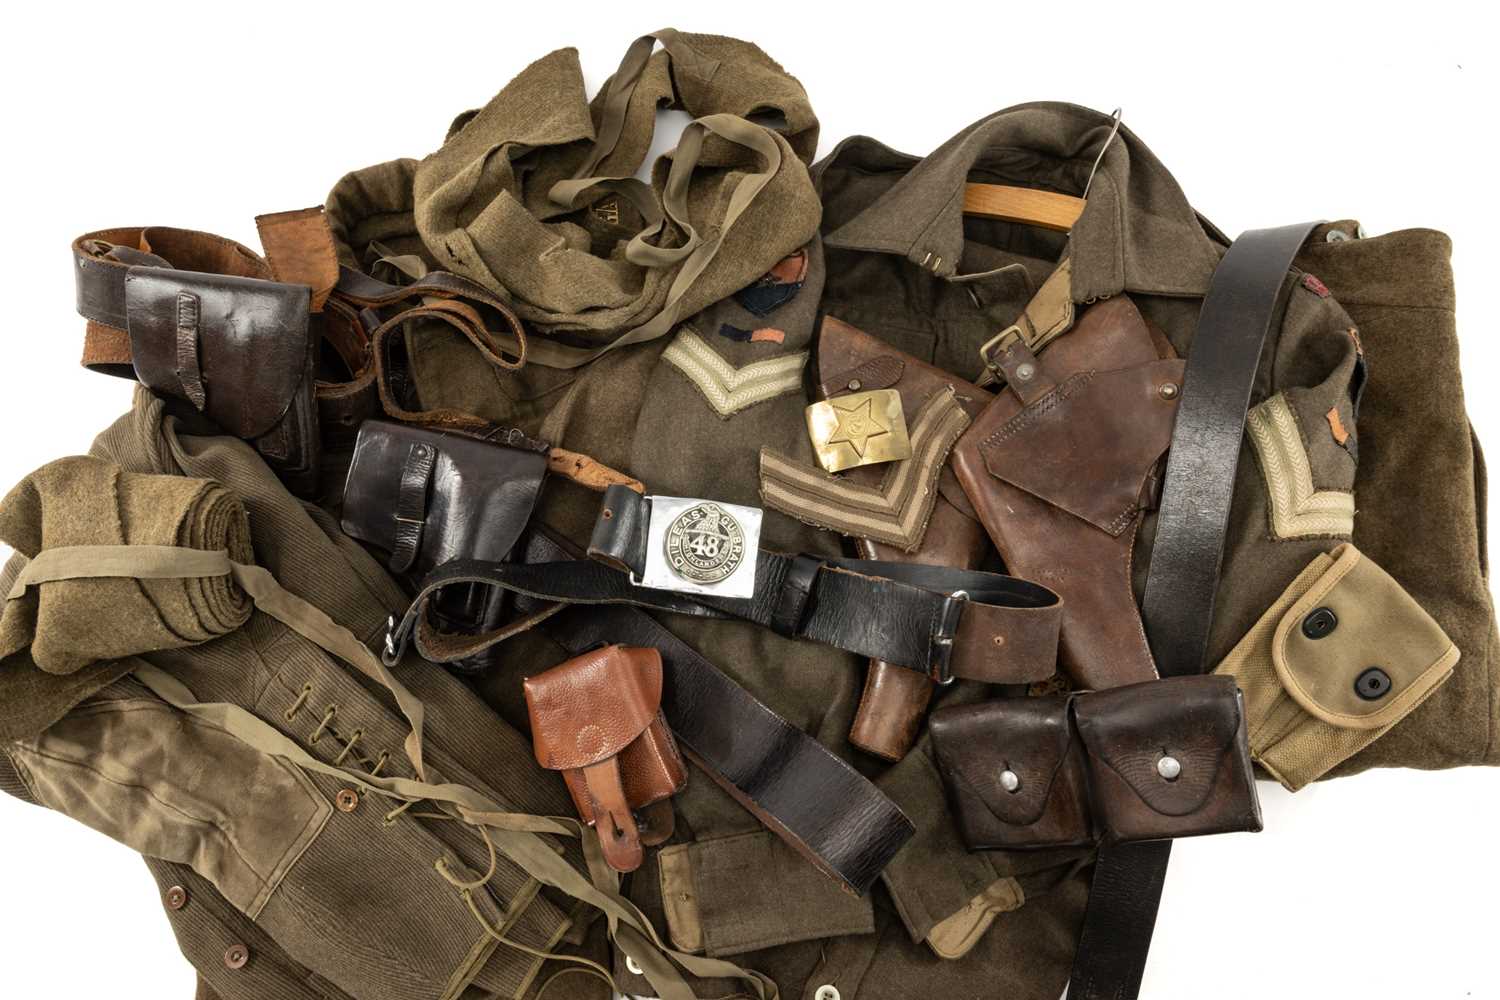 THE MILITARY CLUB HOUSE: VINTAGE BRITISH ARMY UNIFORM ITEMS & BELTS including belt with 48